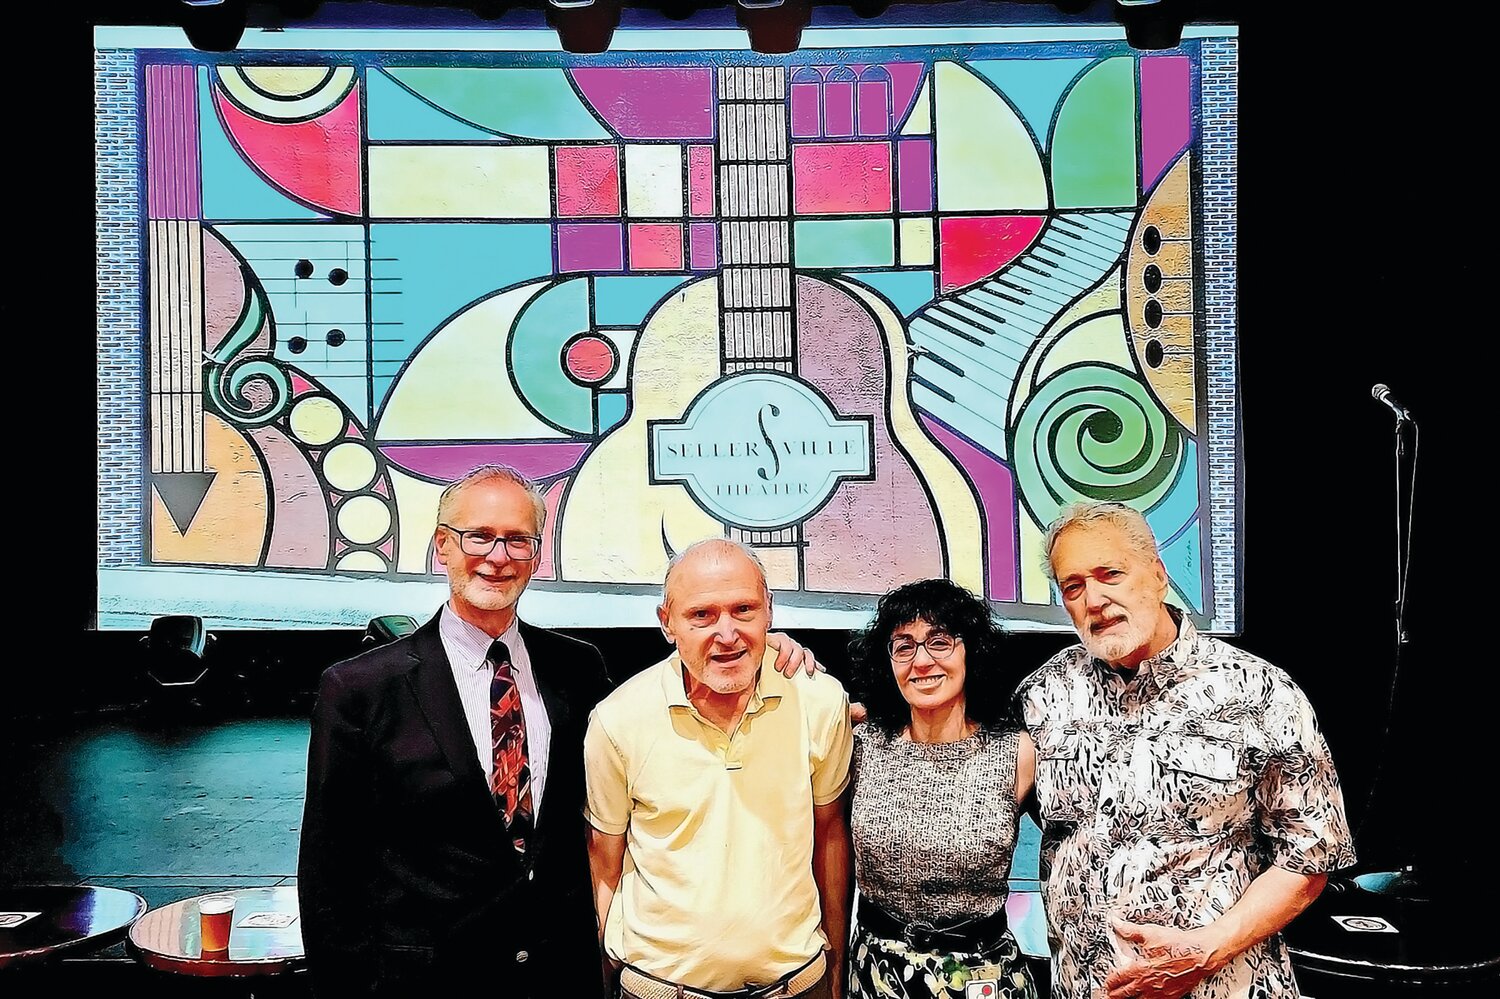 Stephen Barth, of Barth Consulting Group, William Quigley and Elayne Brick, Proprietors of the Washington House and Sellersville Theater stand  with mural designer Domenic Falcone.